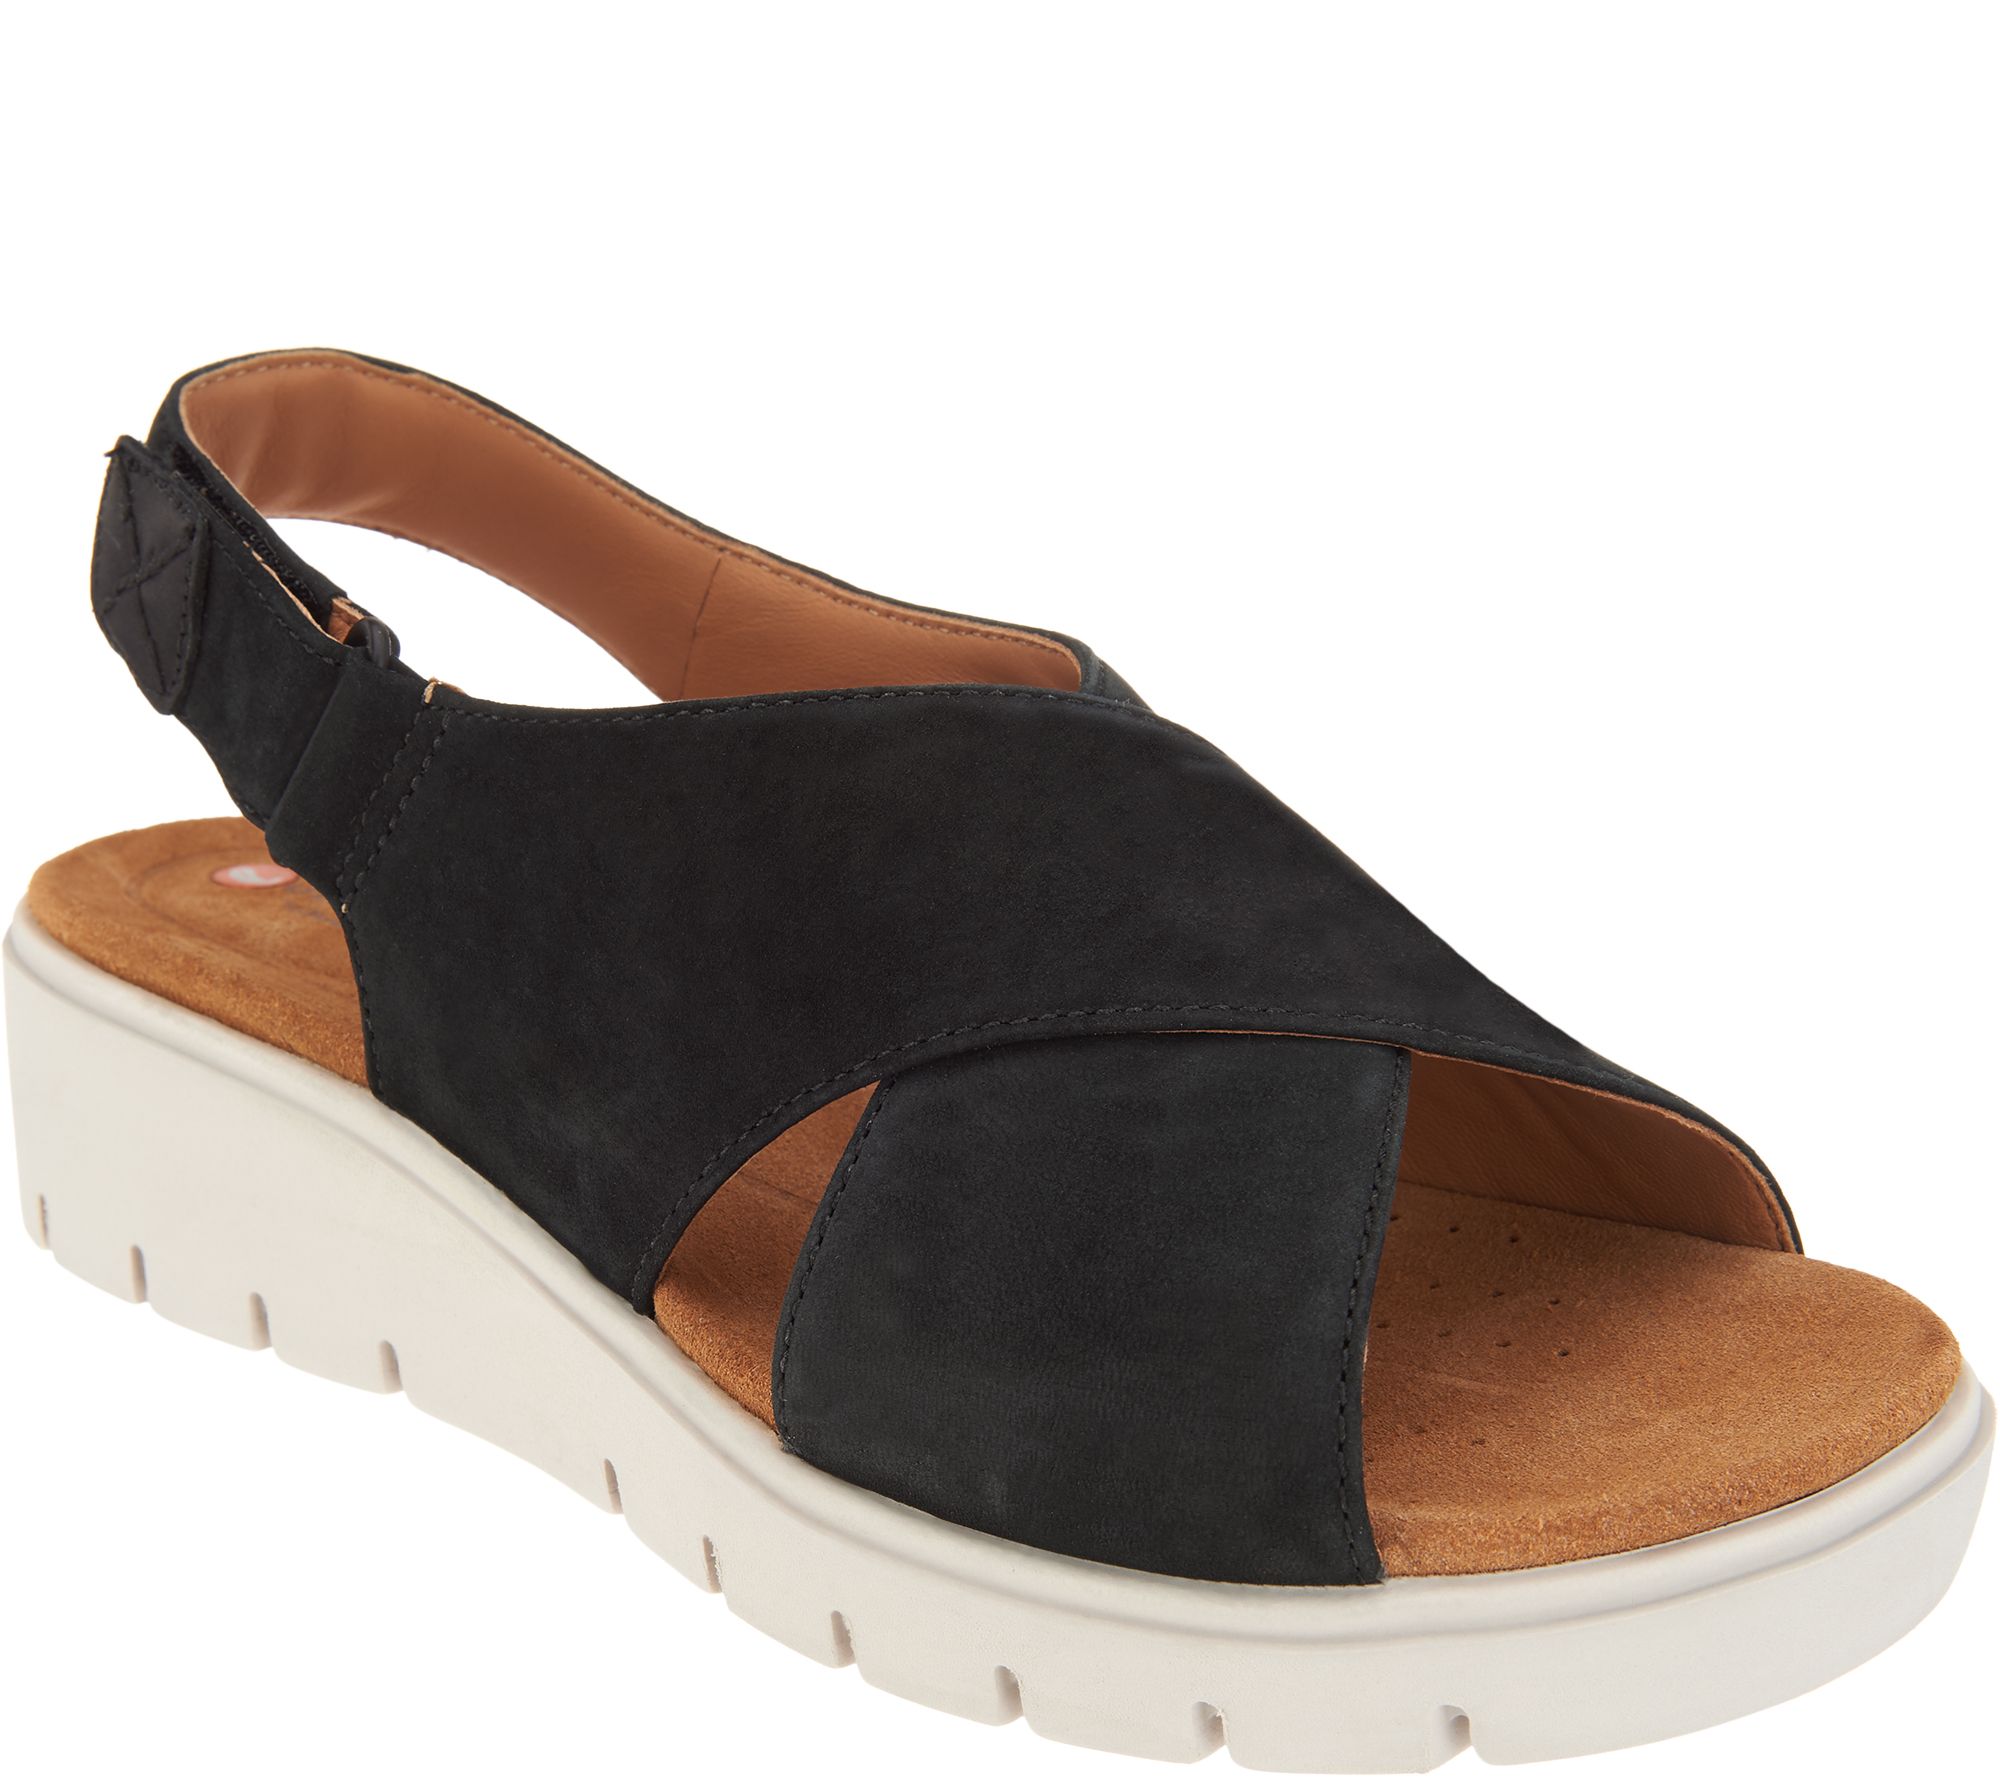 unstructured sandals by clarks